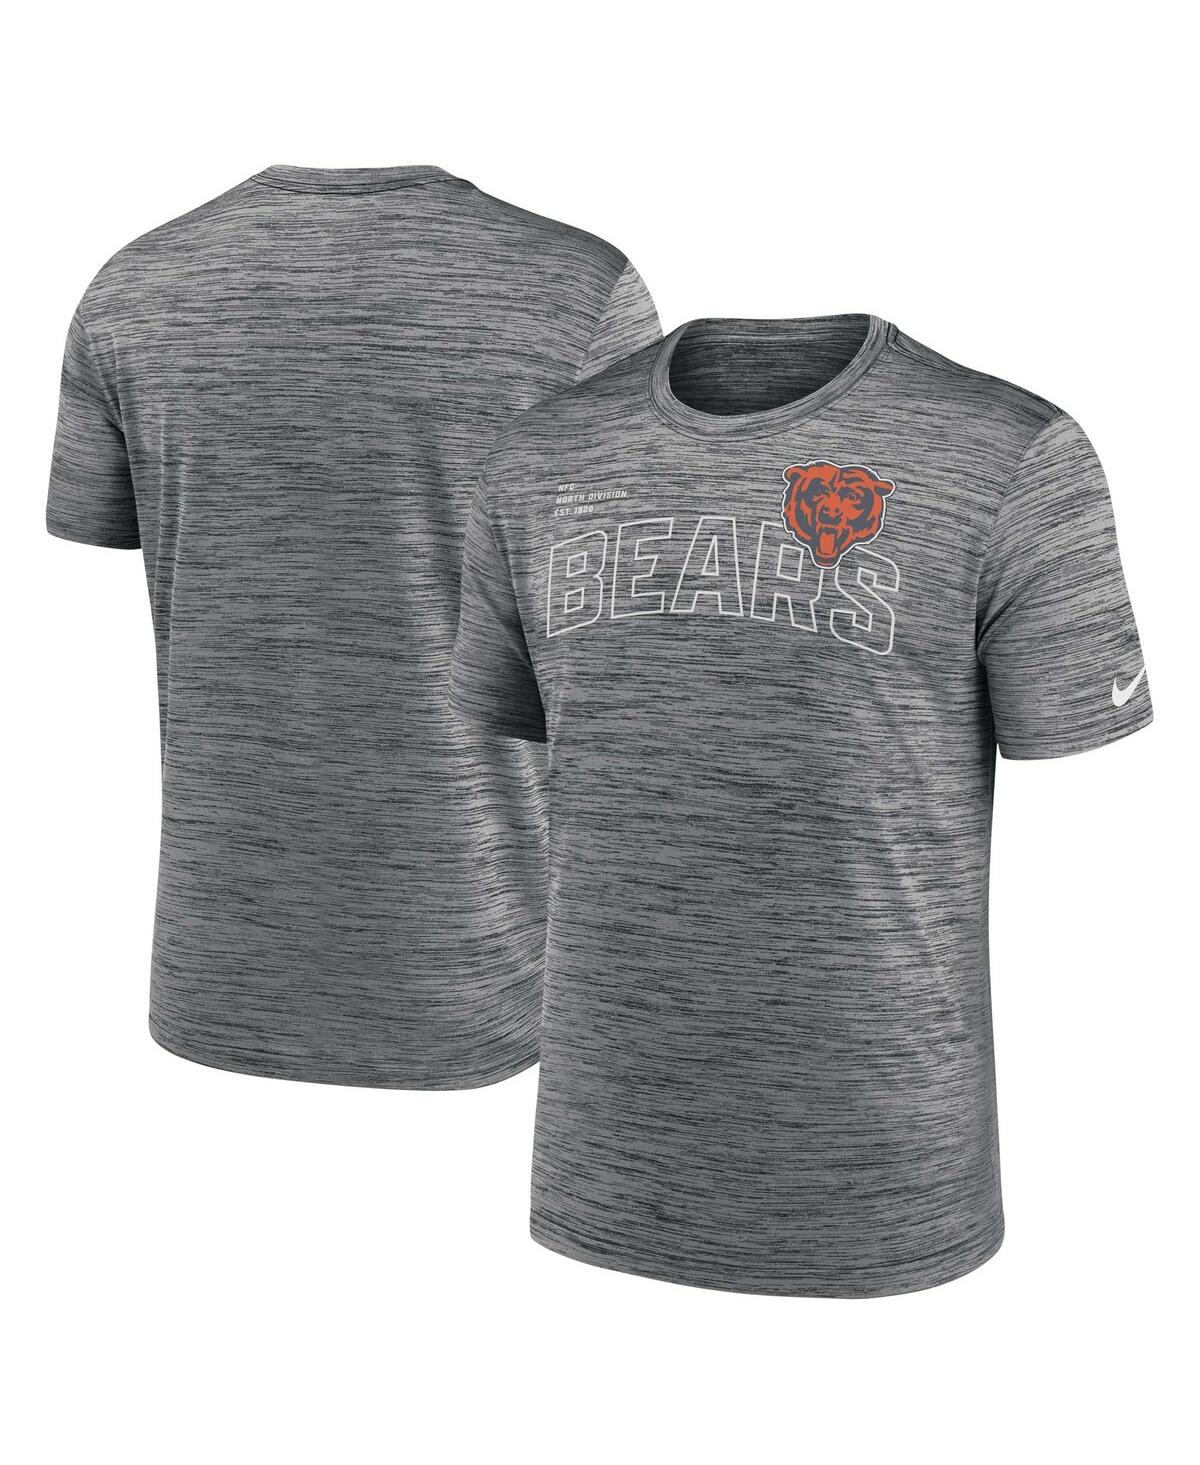 Shop Nike Men's  Anthracite Chicago Bears Big And Tall Velocity Performance T-shirt